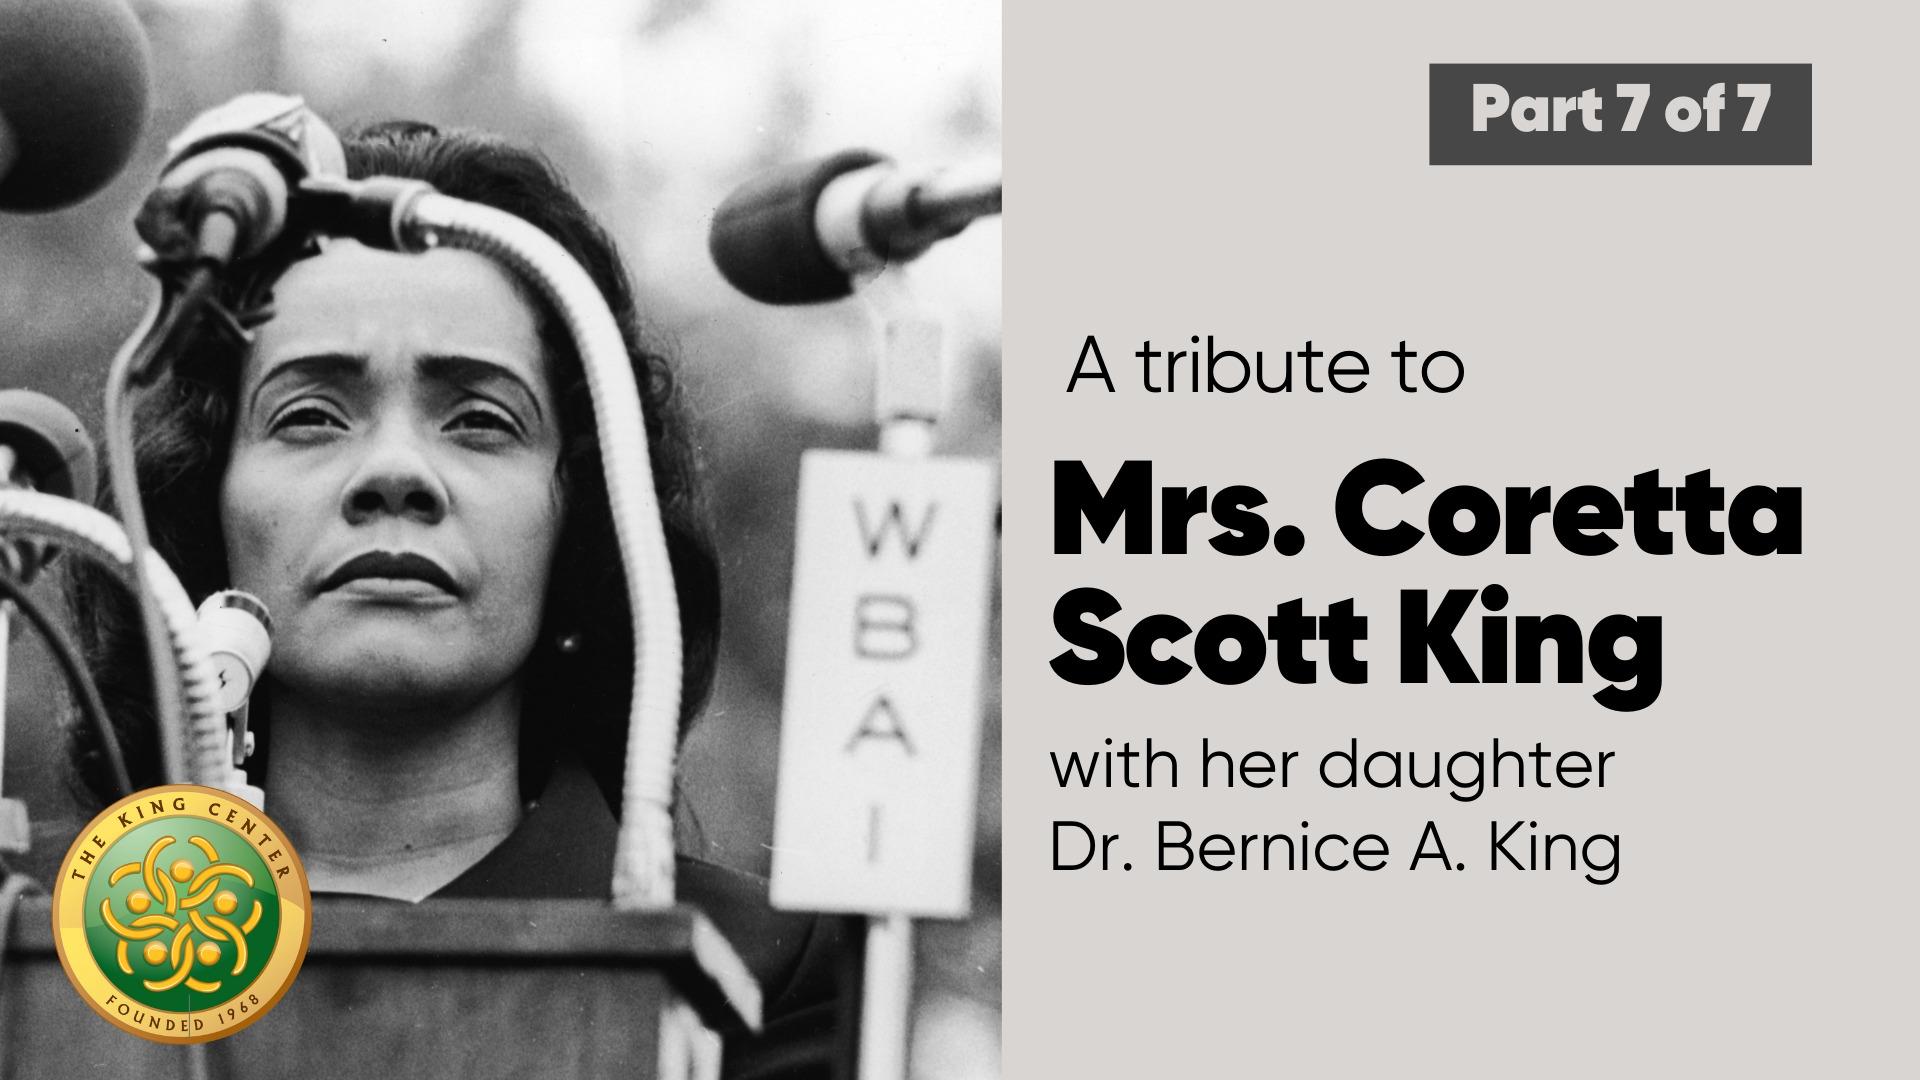 A tribute to Mrs. Coretta Scott King with her daughter Dr. Bernice A. King- Part 7 of 7